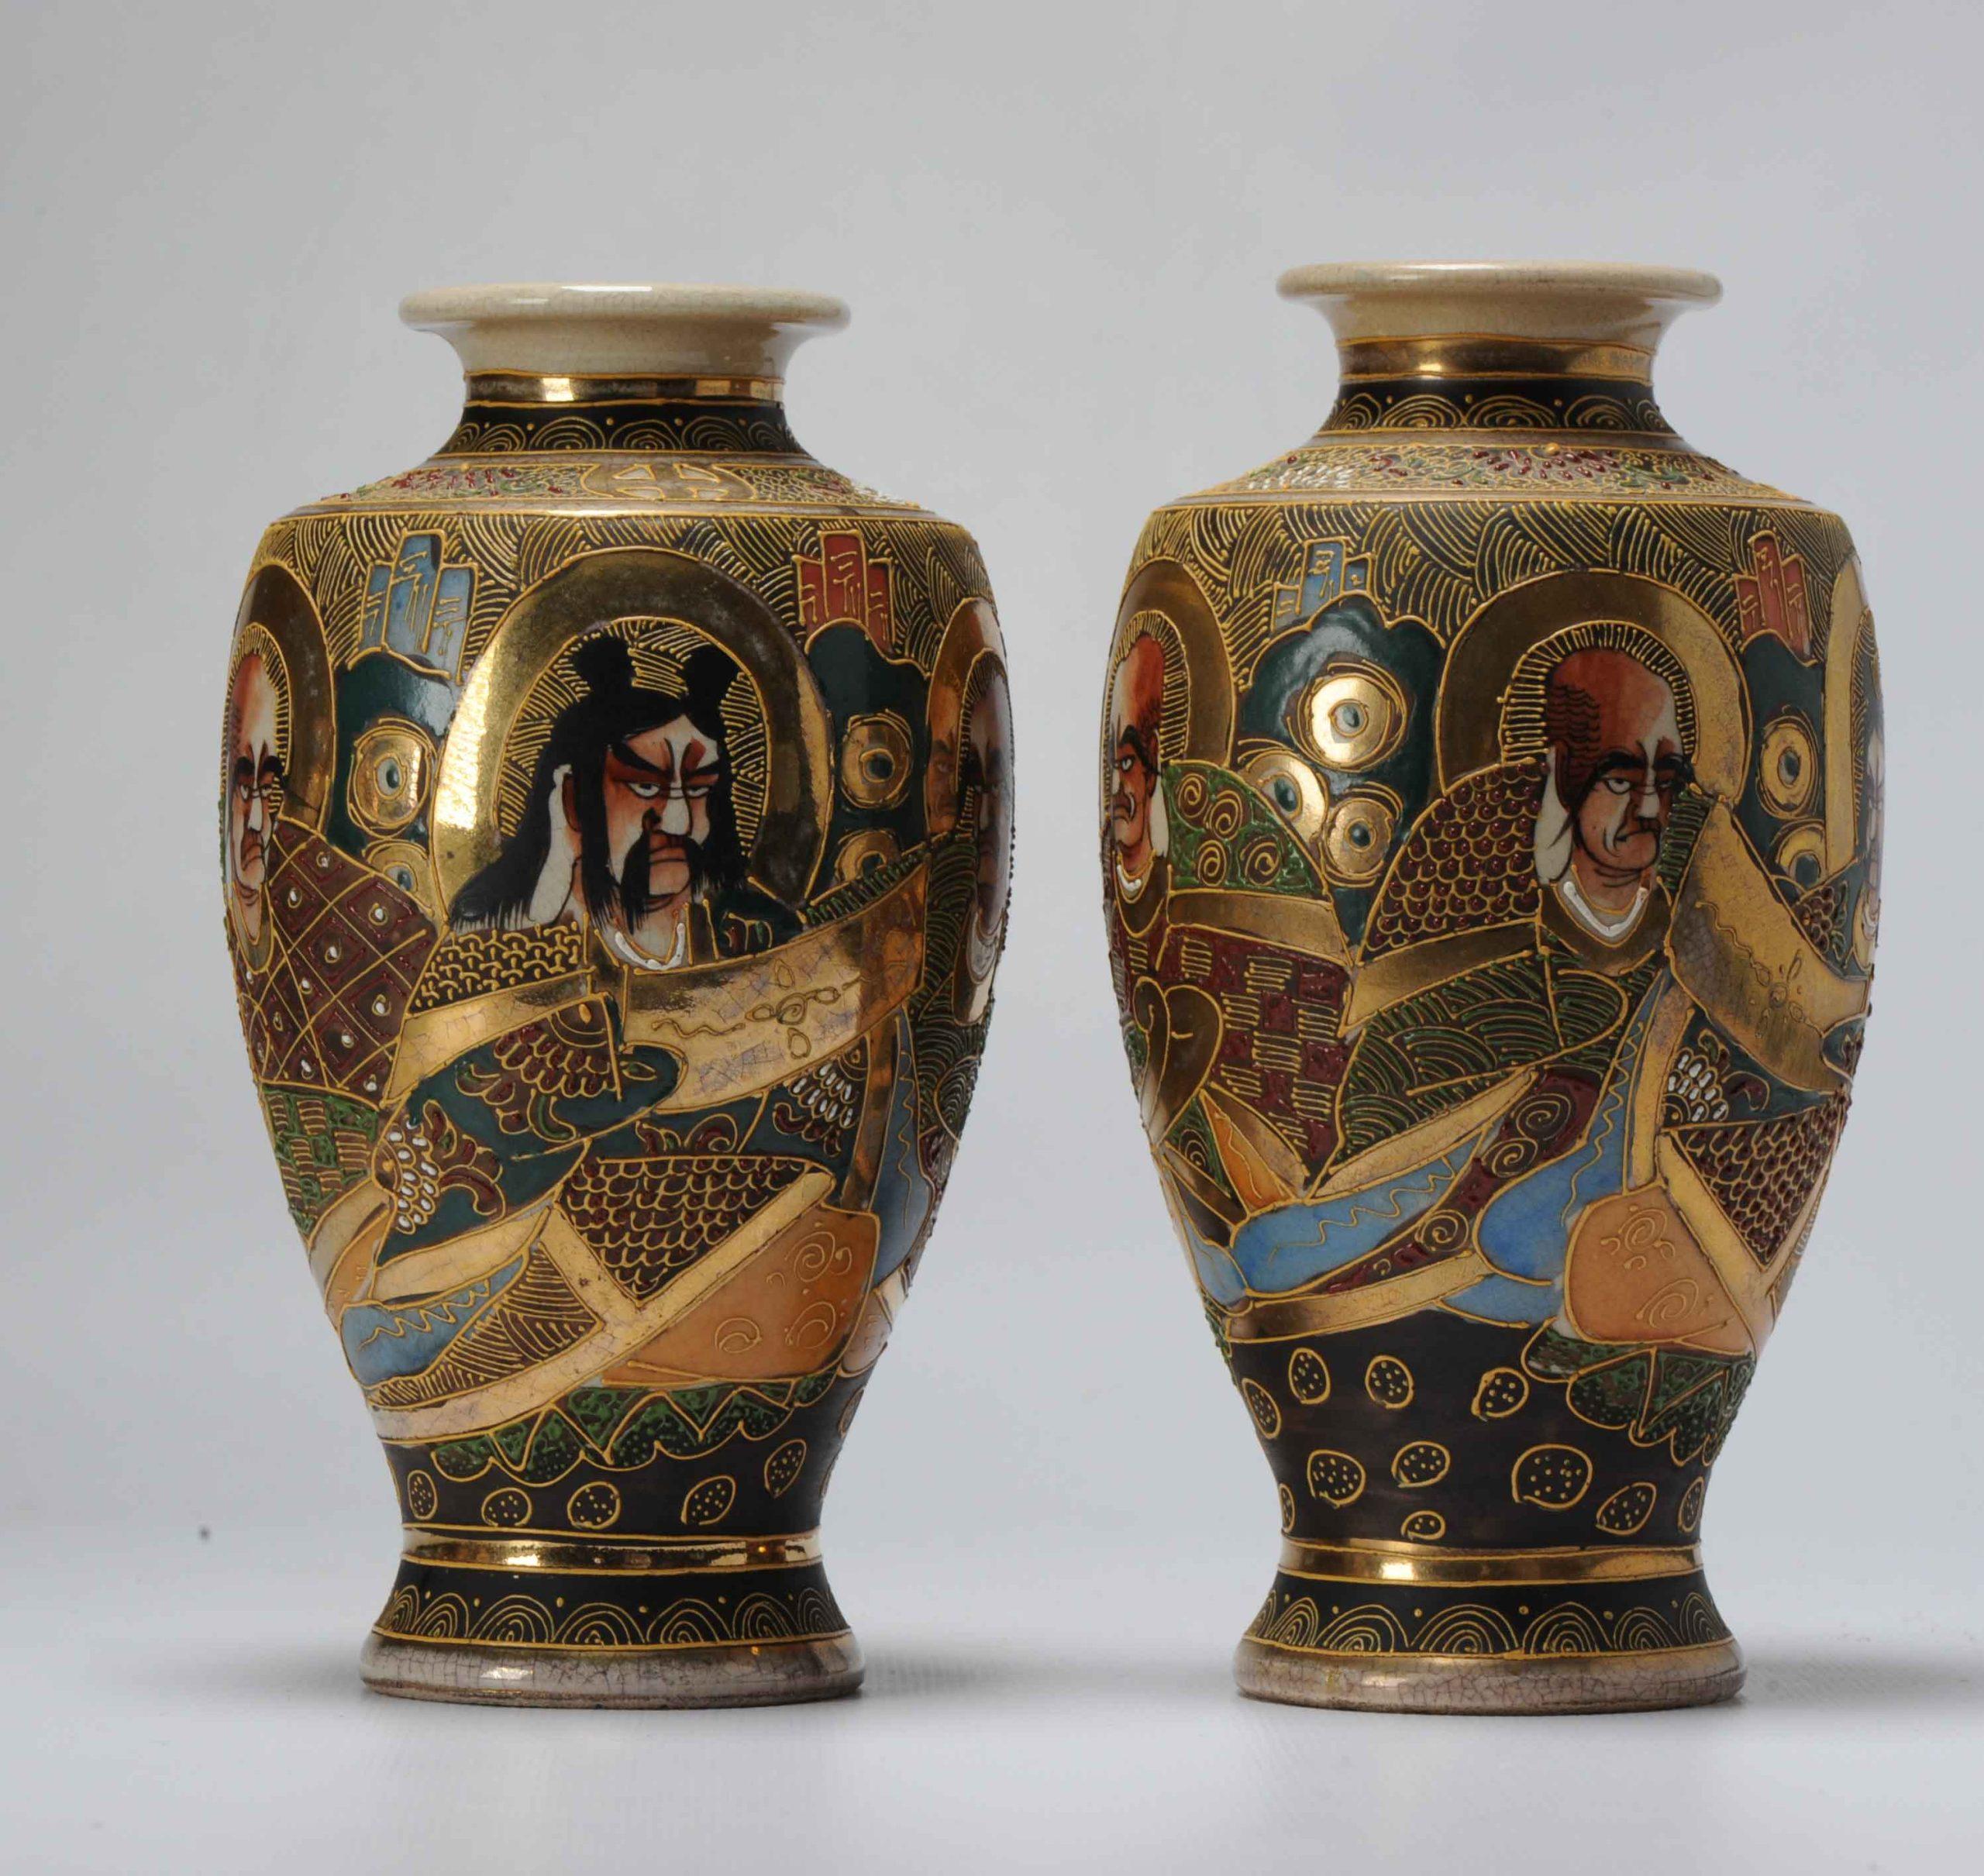 A lovely set of two Satsuma Vases with figures/Arhats. Marked at base.

Additional information:
Material: Porcelain & Pottery
Type: Vase
Japanese Style: Satsuma
Region of Origin: Japan
Period: 20th century Showa Periode (1926-1989), Taisho Periode